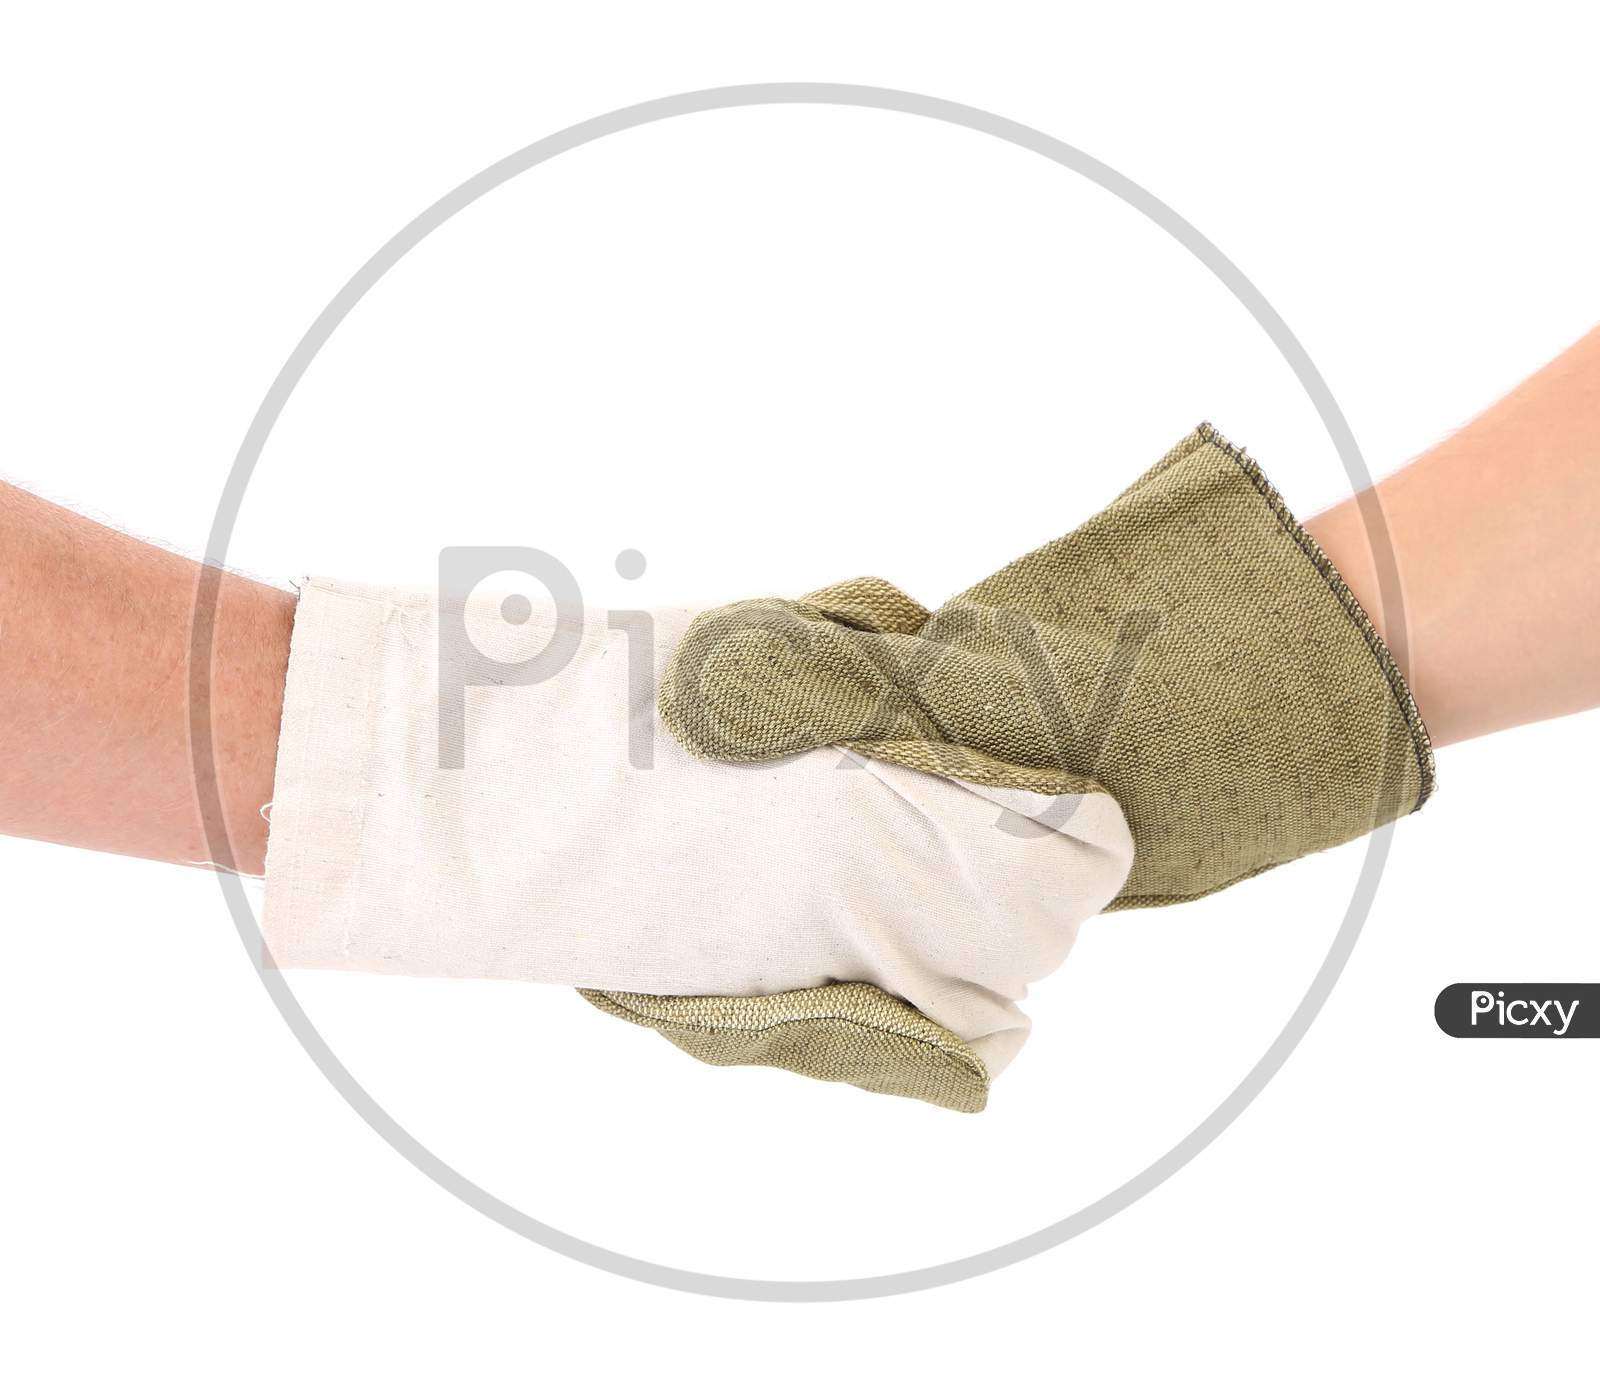 Two Hands Mittens In Hand Shake. Isolated On A White Background.